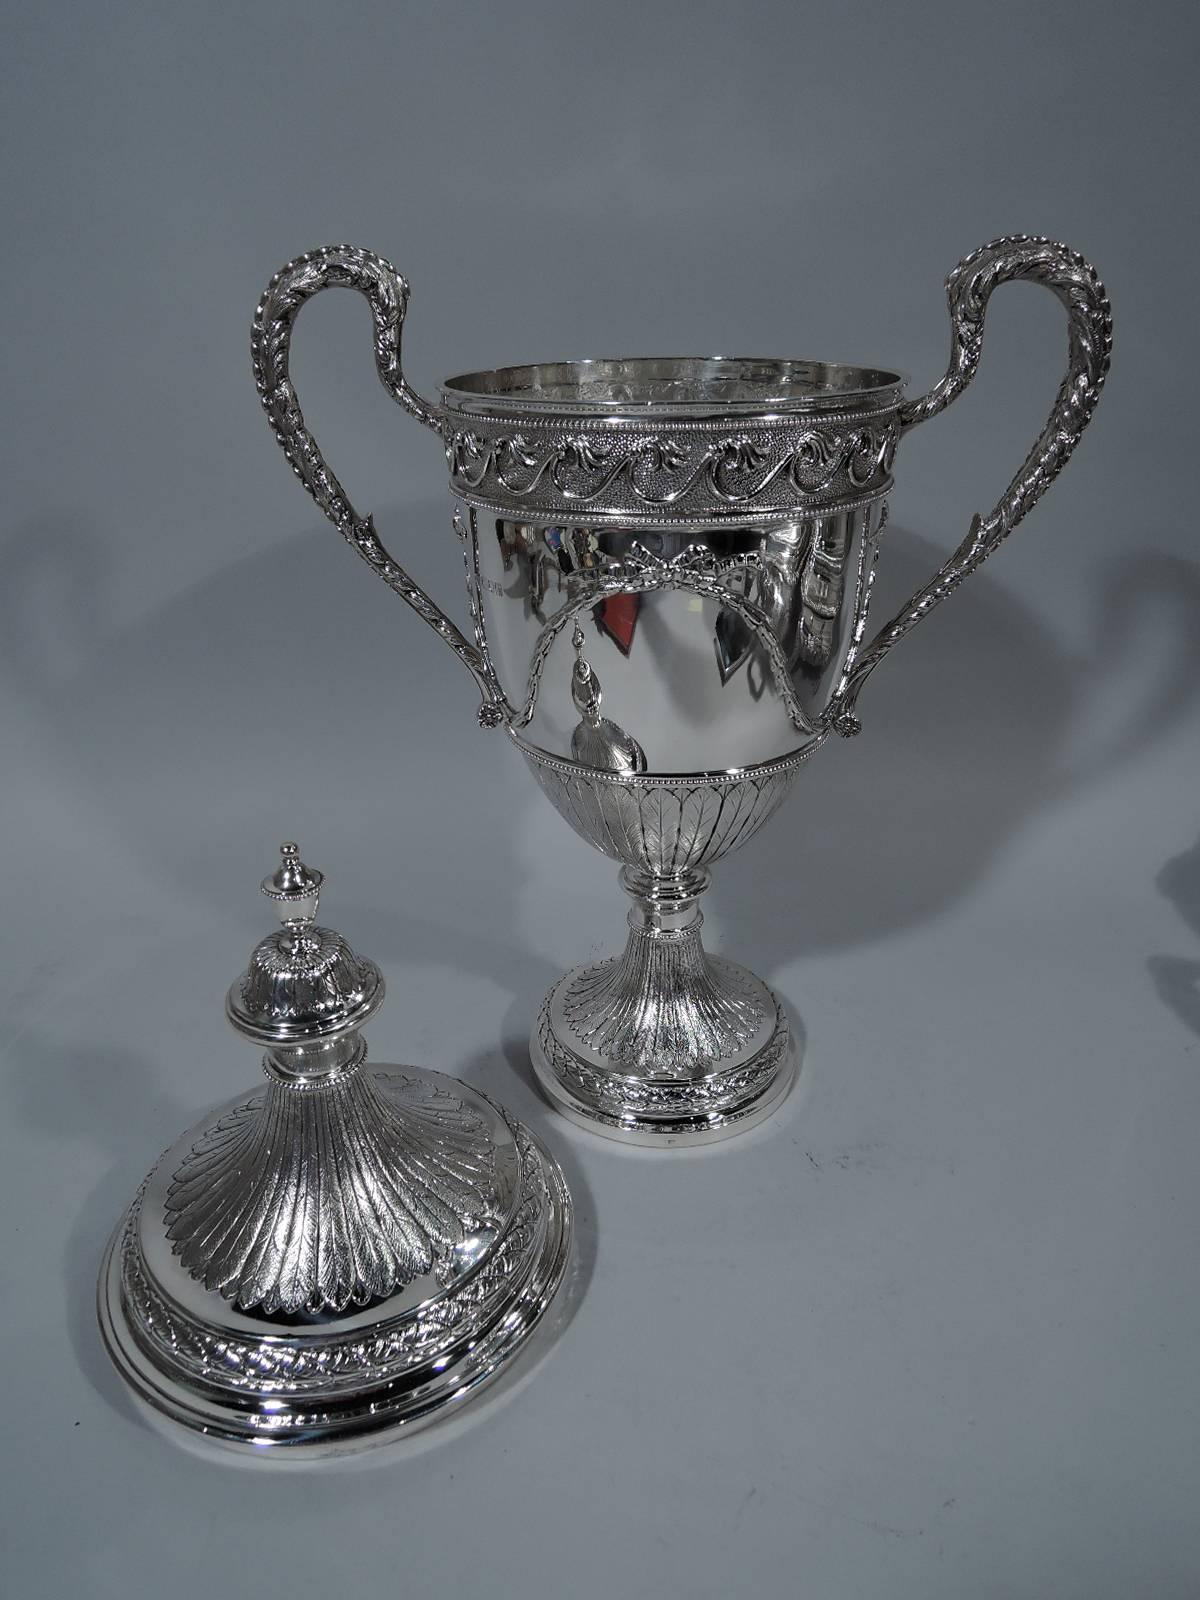 George V sterling silver trophy cup. Made by Goldsmiths & Silversmiths in London in 1912. Amphora with high-looping side handles and double-domed cover. Leaves, bow-tied garland, Vitruvian scroll, and beading. A neoclassical urn repeated in small